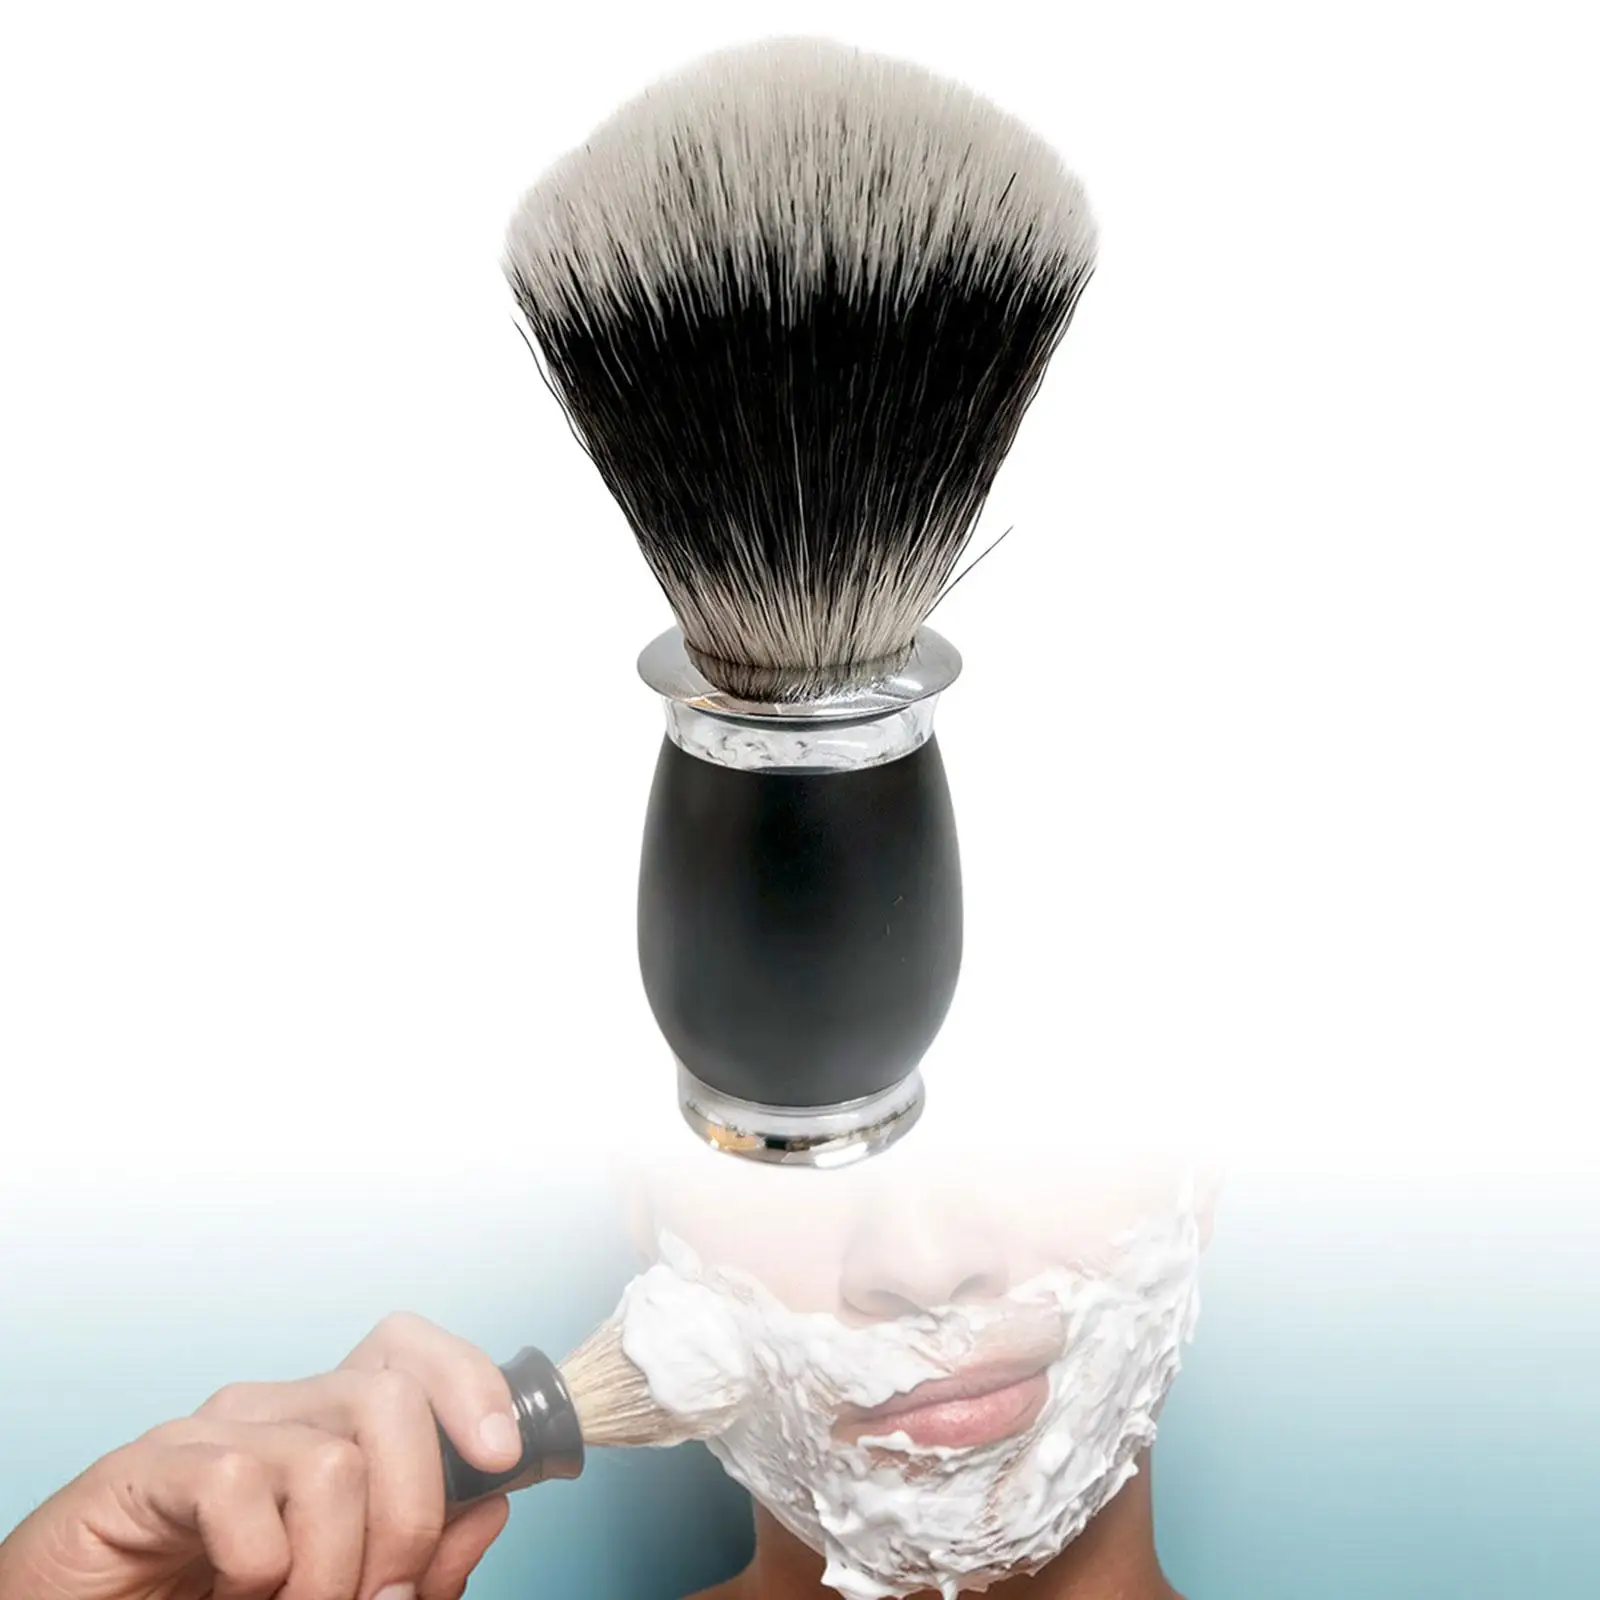 Men Shaving Brush Rich Lather Ergonomic Travel Christmas Gifts Shave Accessory Face Cleaning Hand Crafted for Dad Boyfriend